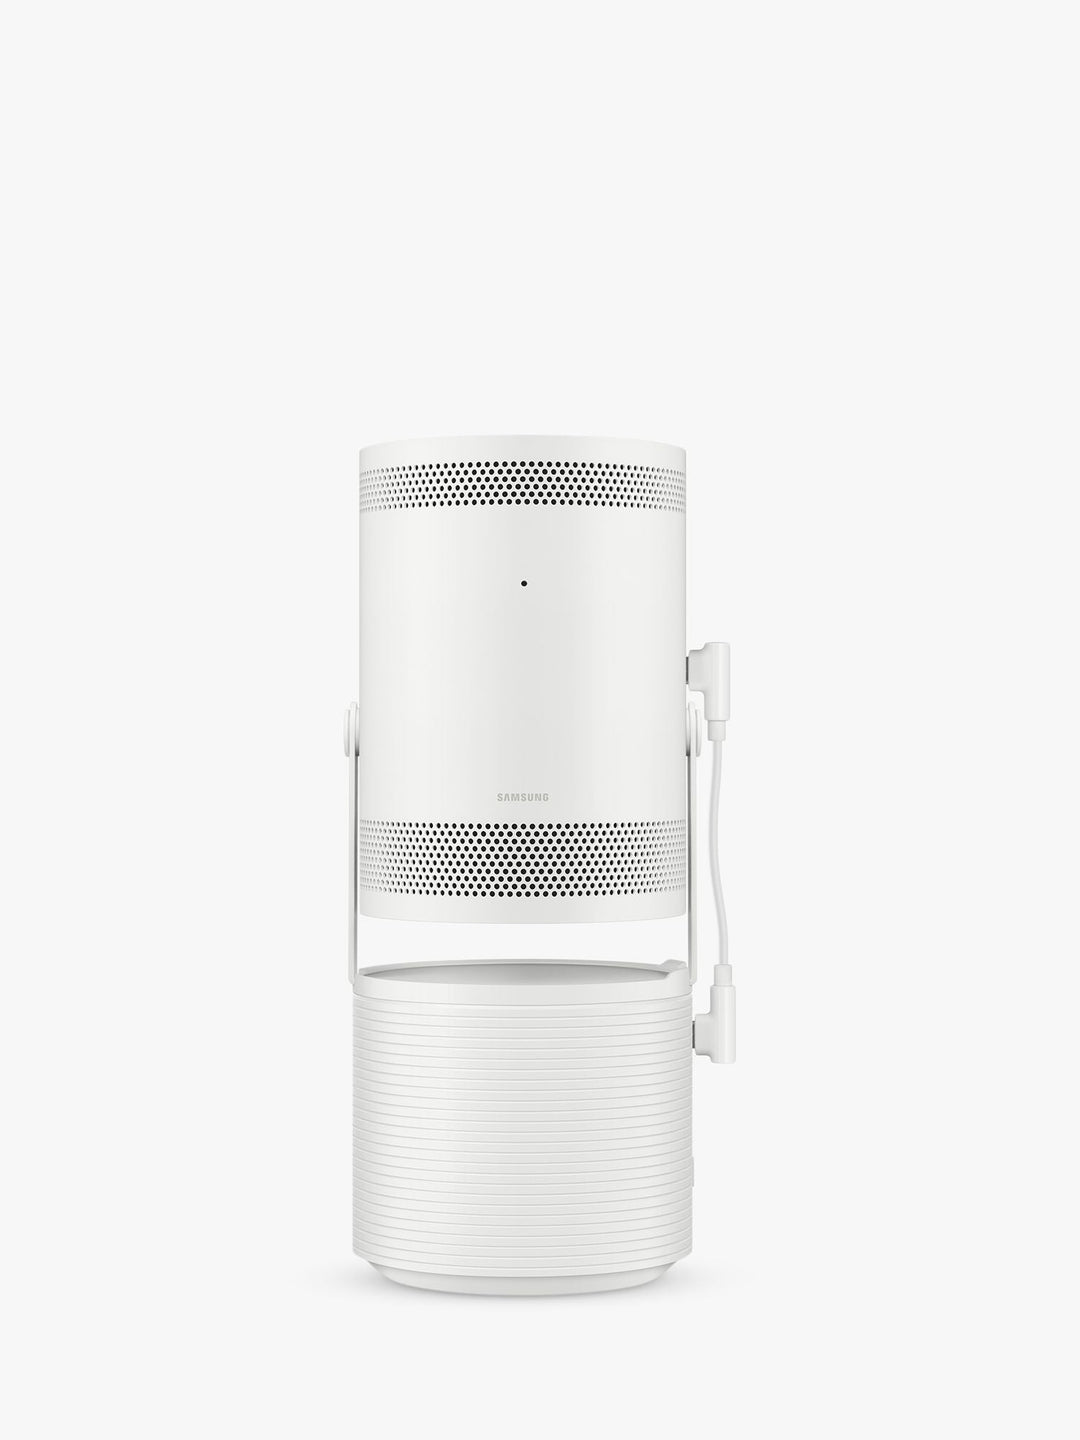 Samsung Freestyle Projector Portable Battery Base 32000mAh High Capacity, USB Charging Port, White